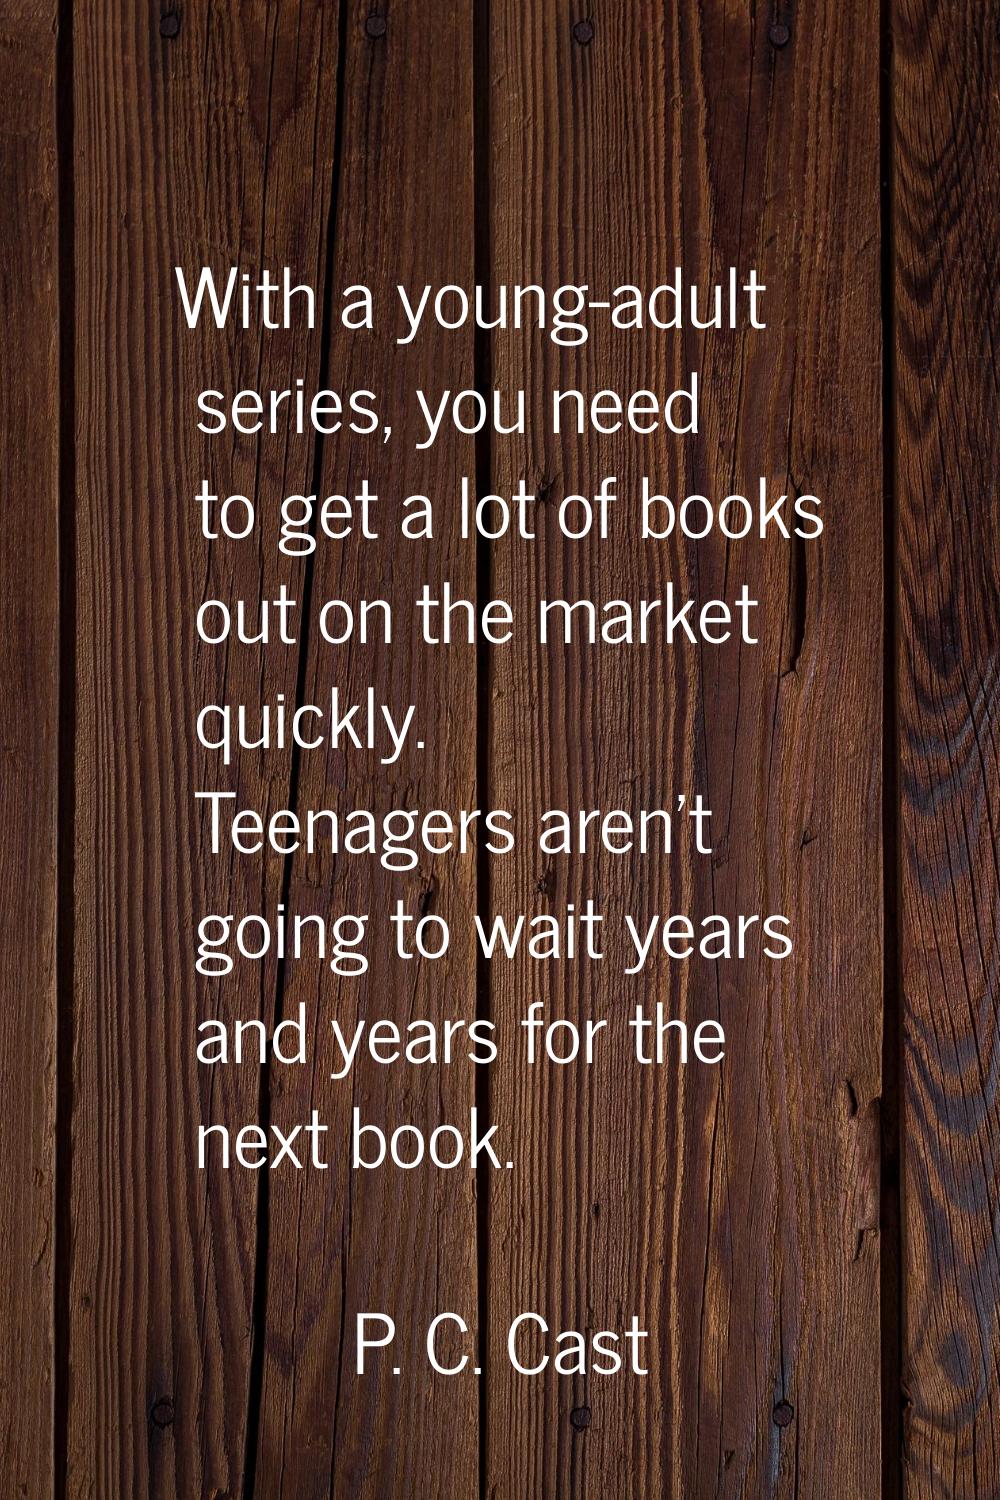 With a young-adult series, you need to get a lot of books out on the market quickly. Teenagers aren